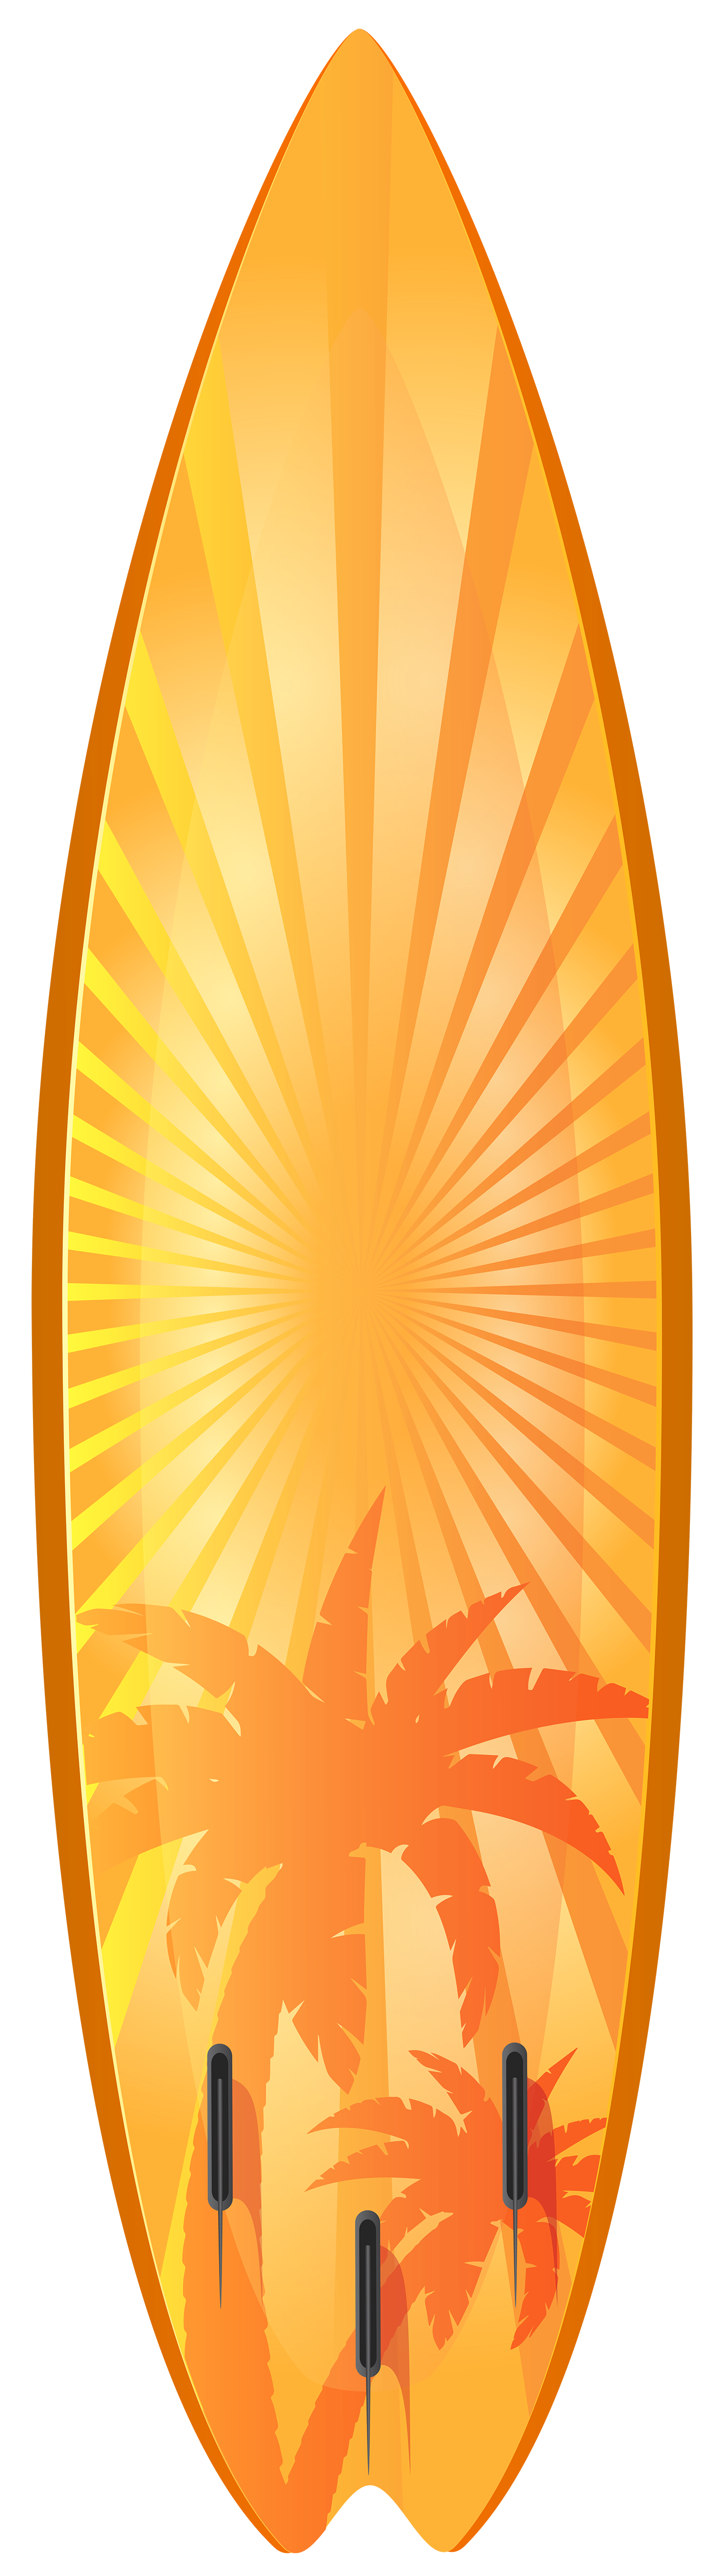 Orange surfboard with palm trees transparent clip art image